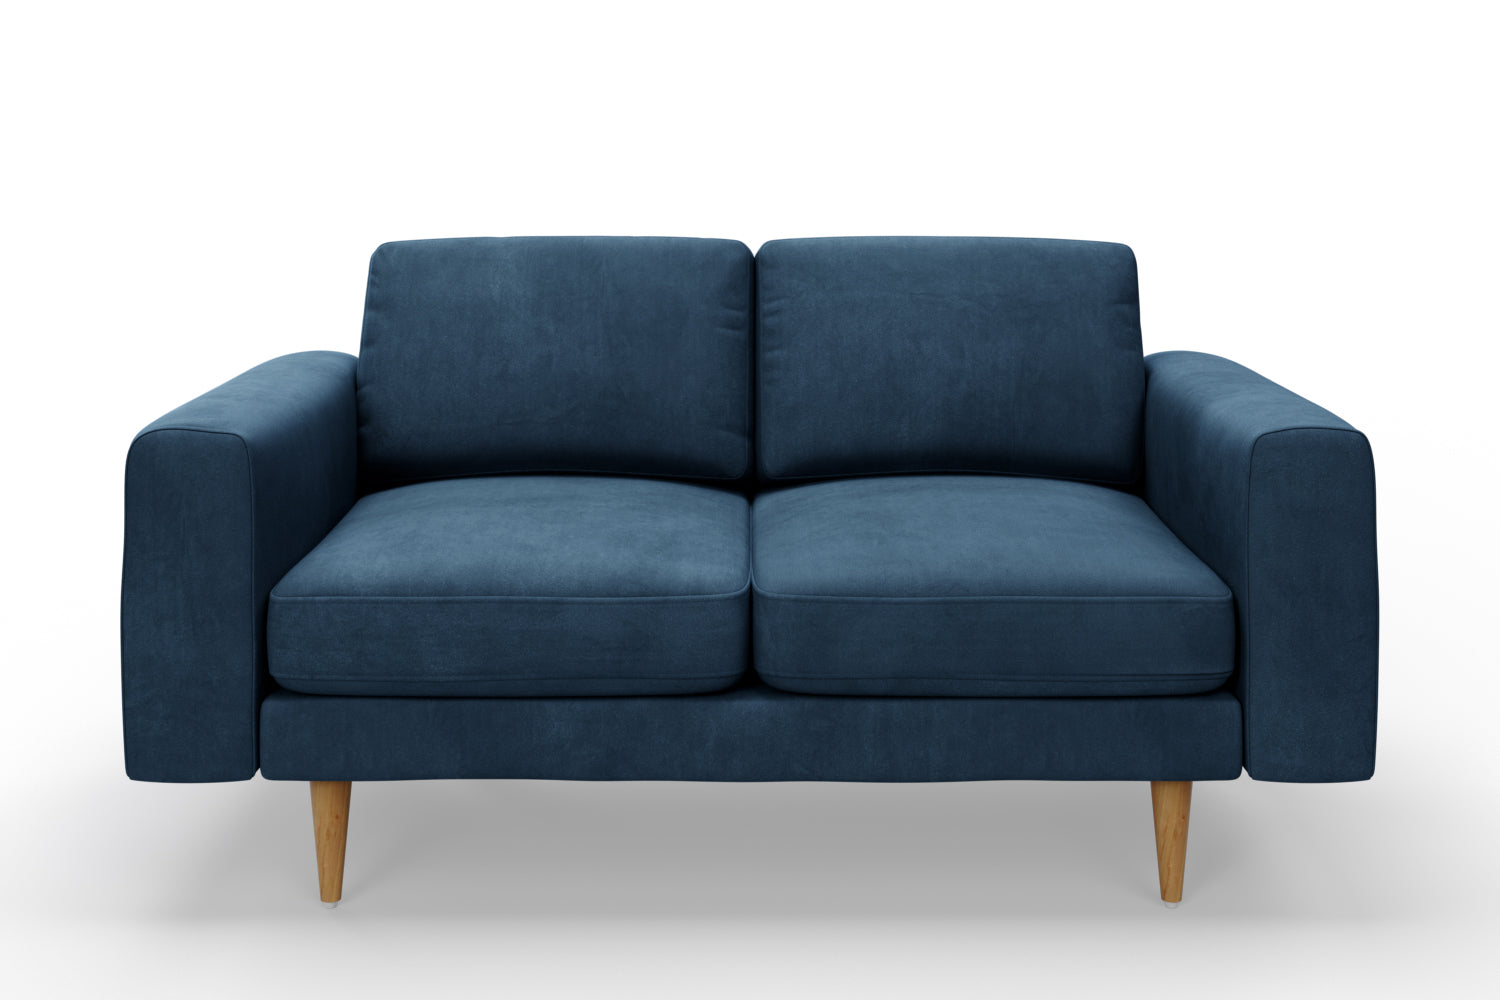 SNUG | The Big Chill 2 Seater Sofa in Blue Steel variant_40414876794928